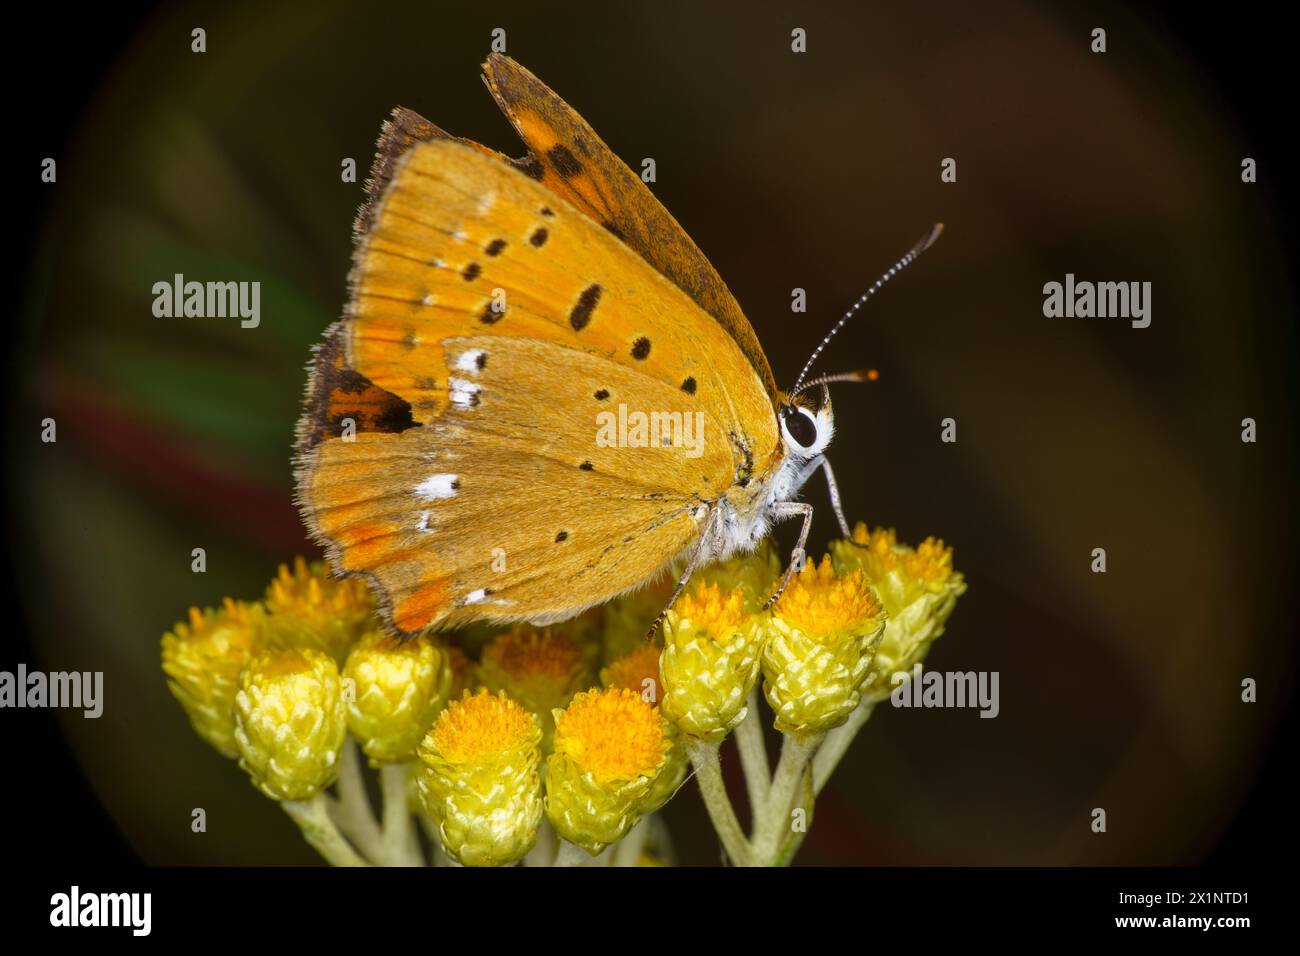 Lycaena virgaureae Family Lycaenidae Genus Lycaena Scarce copper butterfly wild nature insect photography, picture, wallpaper Stock Photo